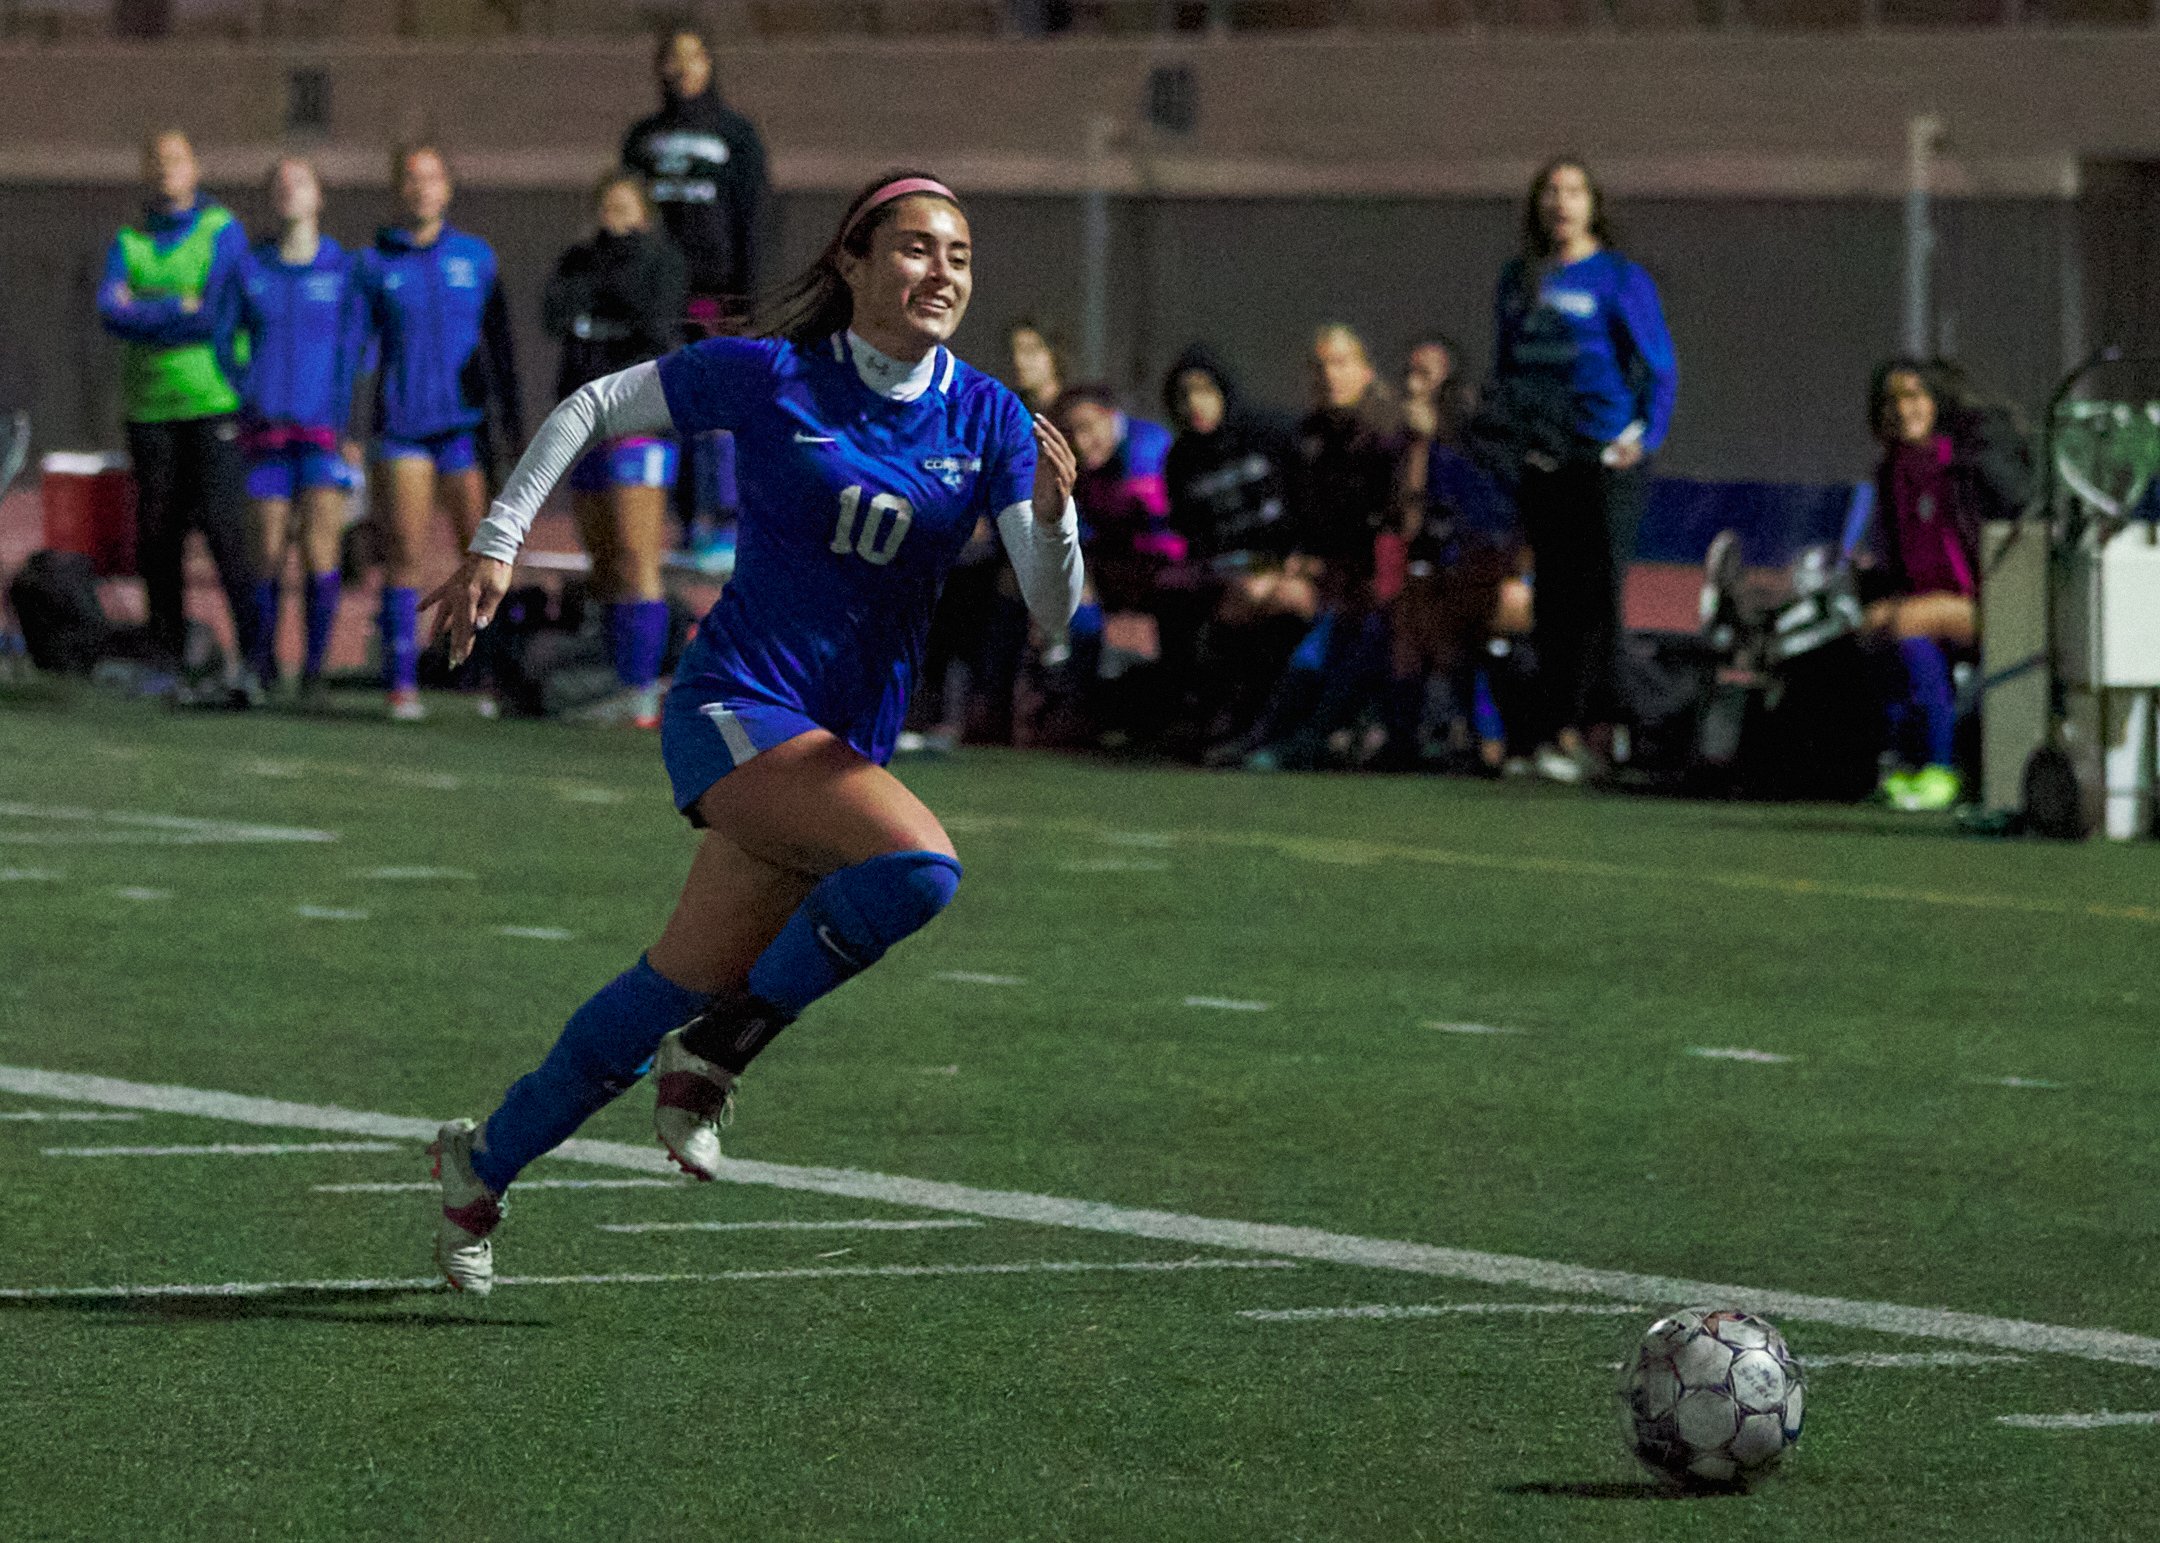  Santa Monica College Corsairs' Ali Alban during the women's soccer match against the Bakersfield College Renegades on Wednesday, Nov. 16, 2022, at Corsair Field in Santa Monica, Calif. The Corsairs won 1-0. (Nicholas McCall | The Corsair) 